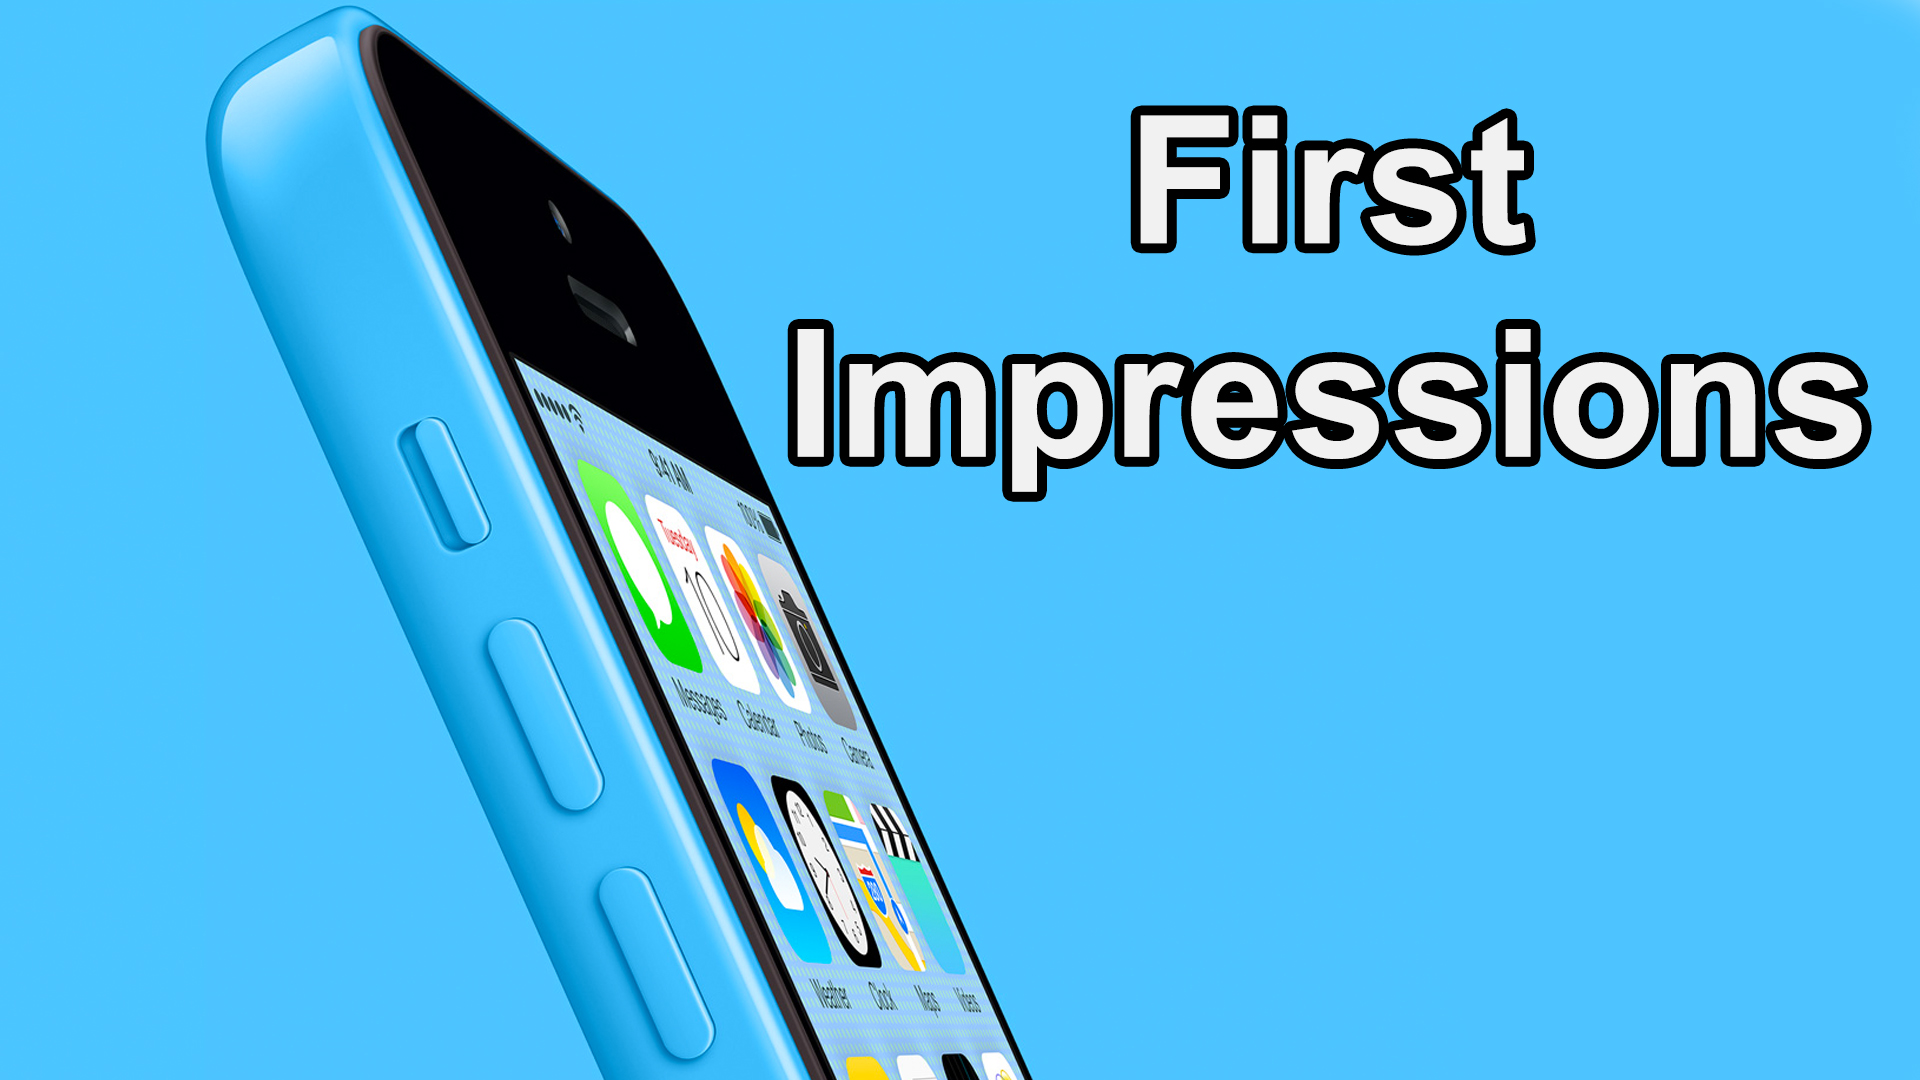 iPhone 5c First Impressions